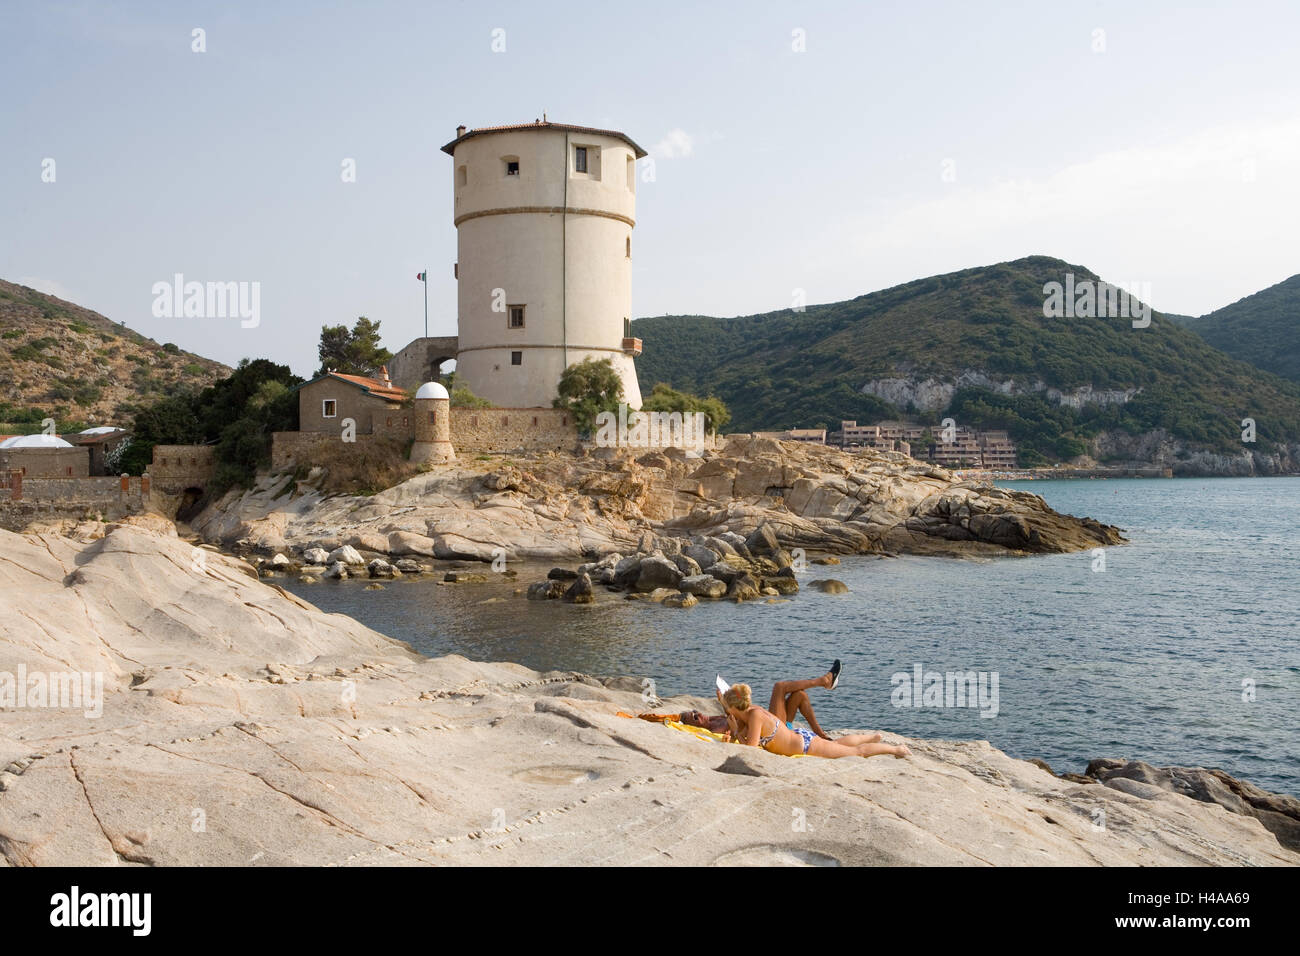 Italy, Tuscany, 'Isola del Giglio', Campese, rocks, tourists, lighthouse, Stock Photo